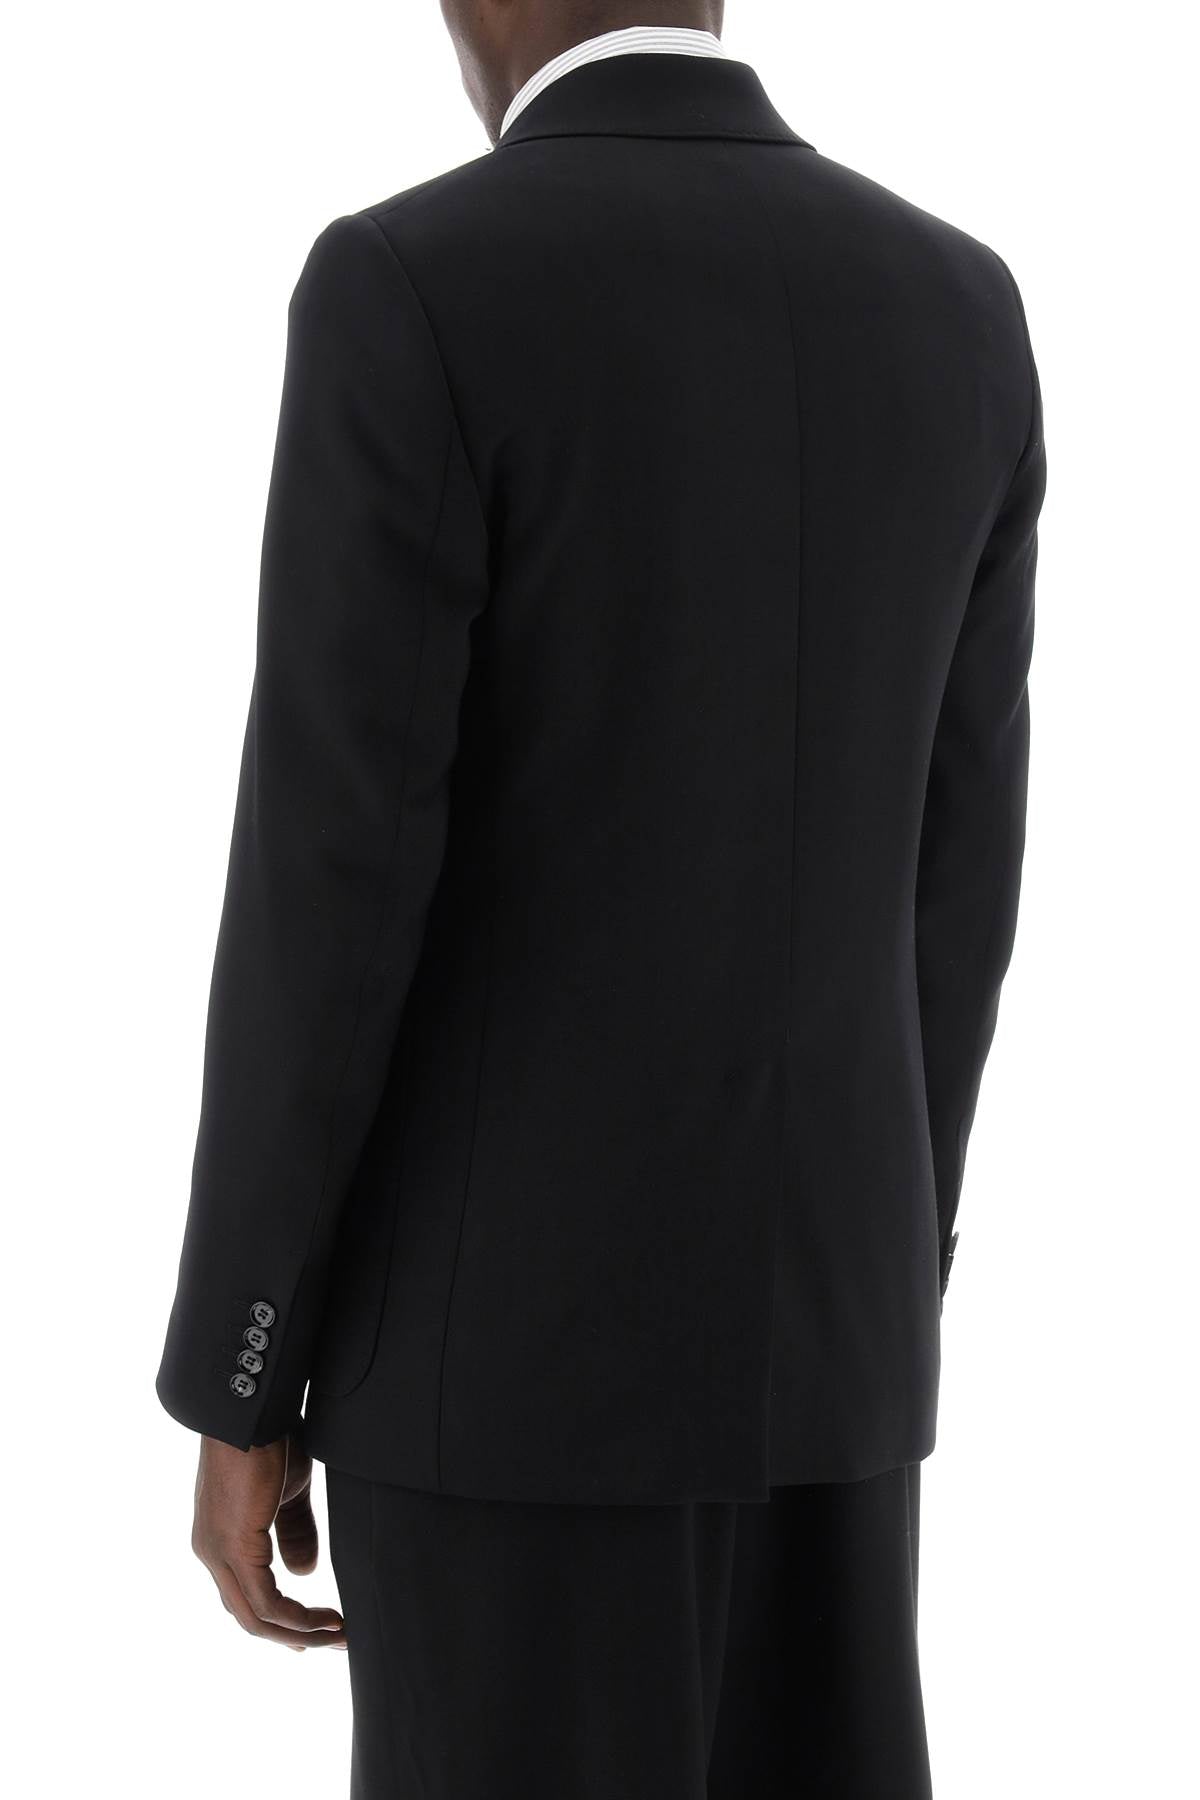 Ami paris double-breasted wool jacket for men-2